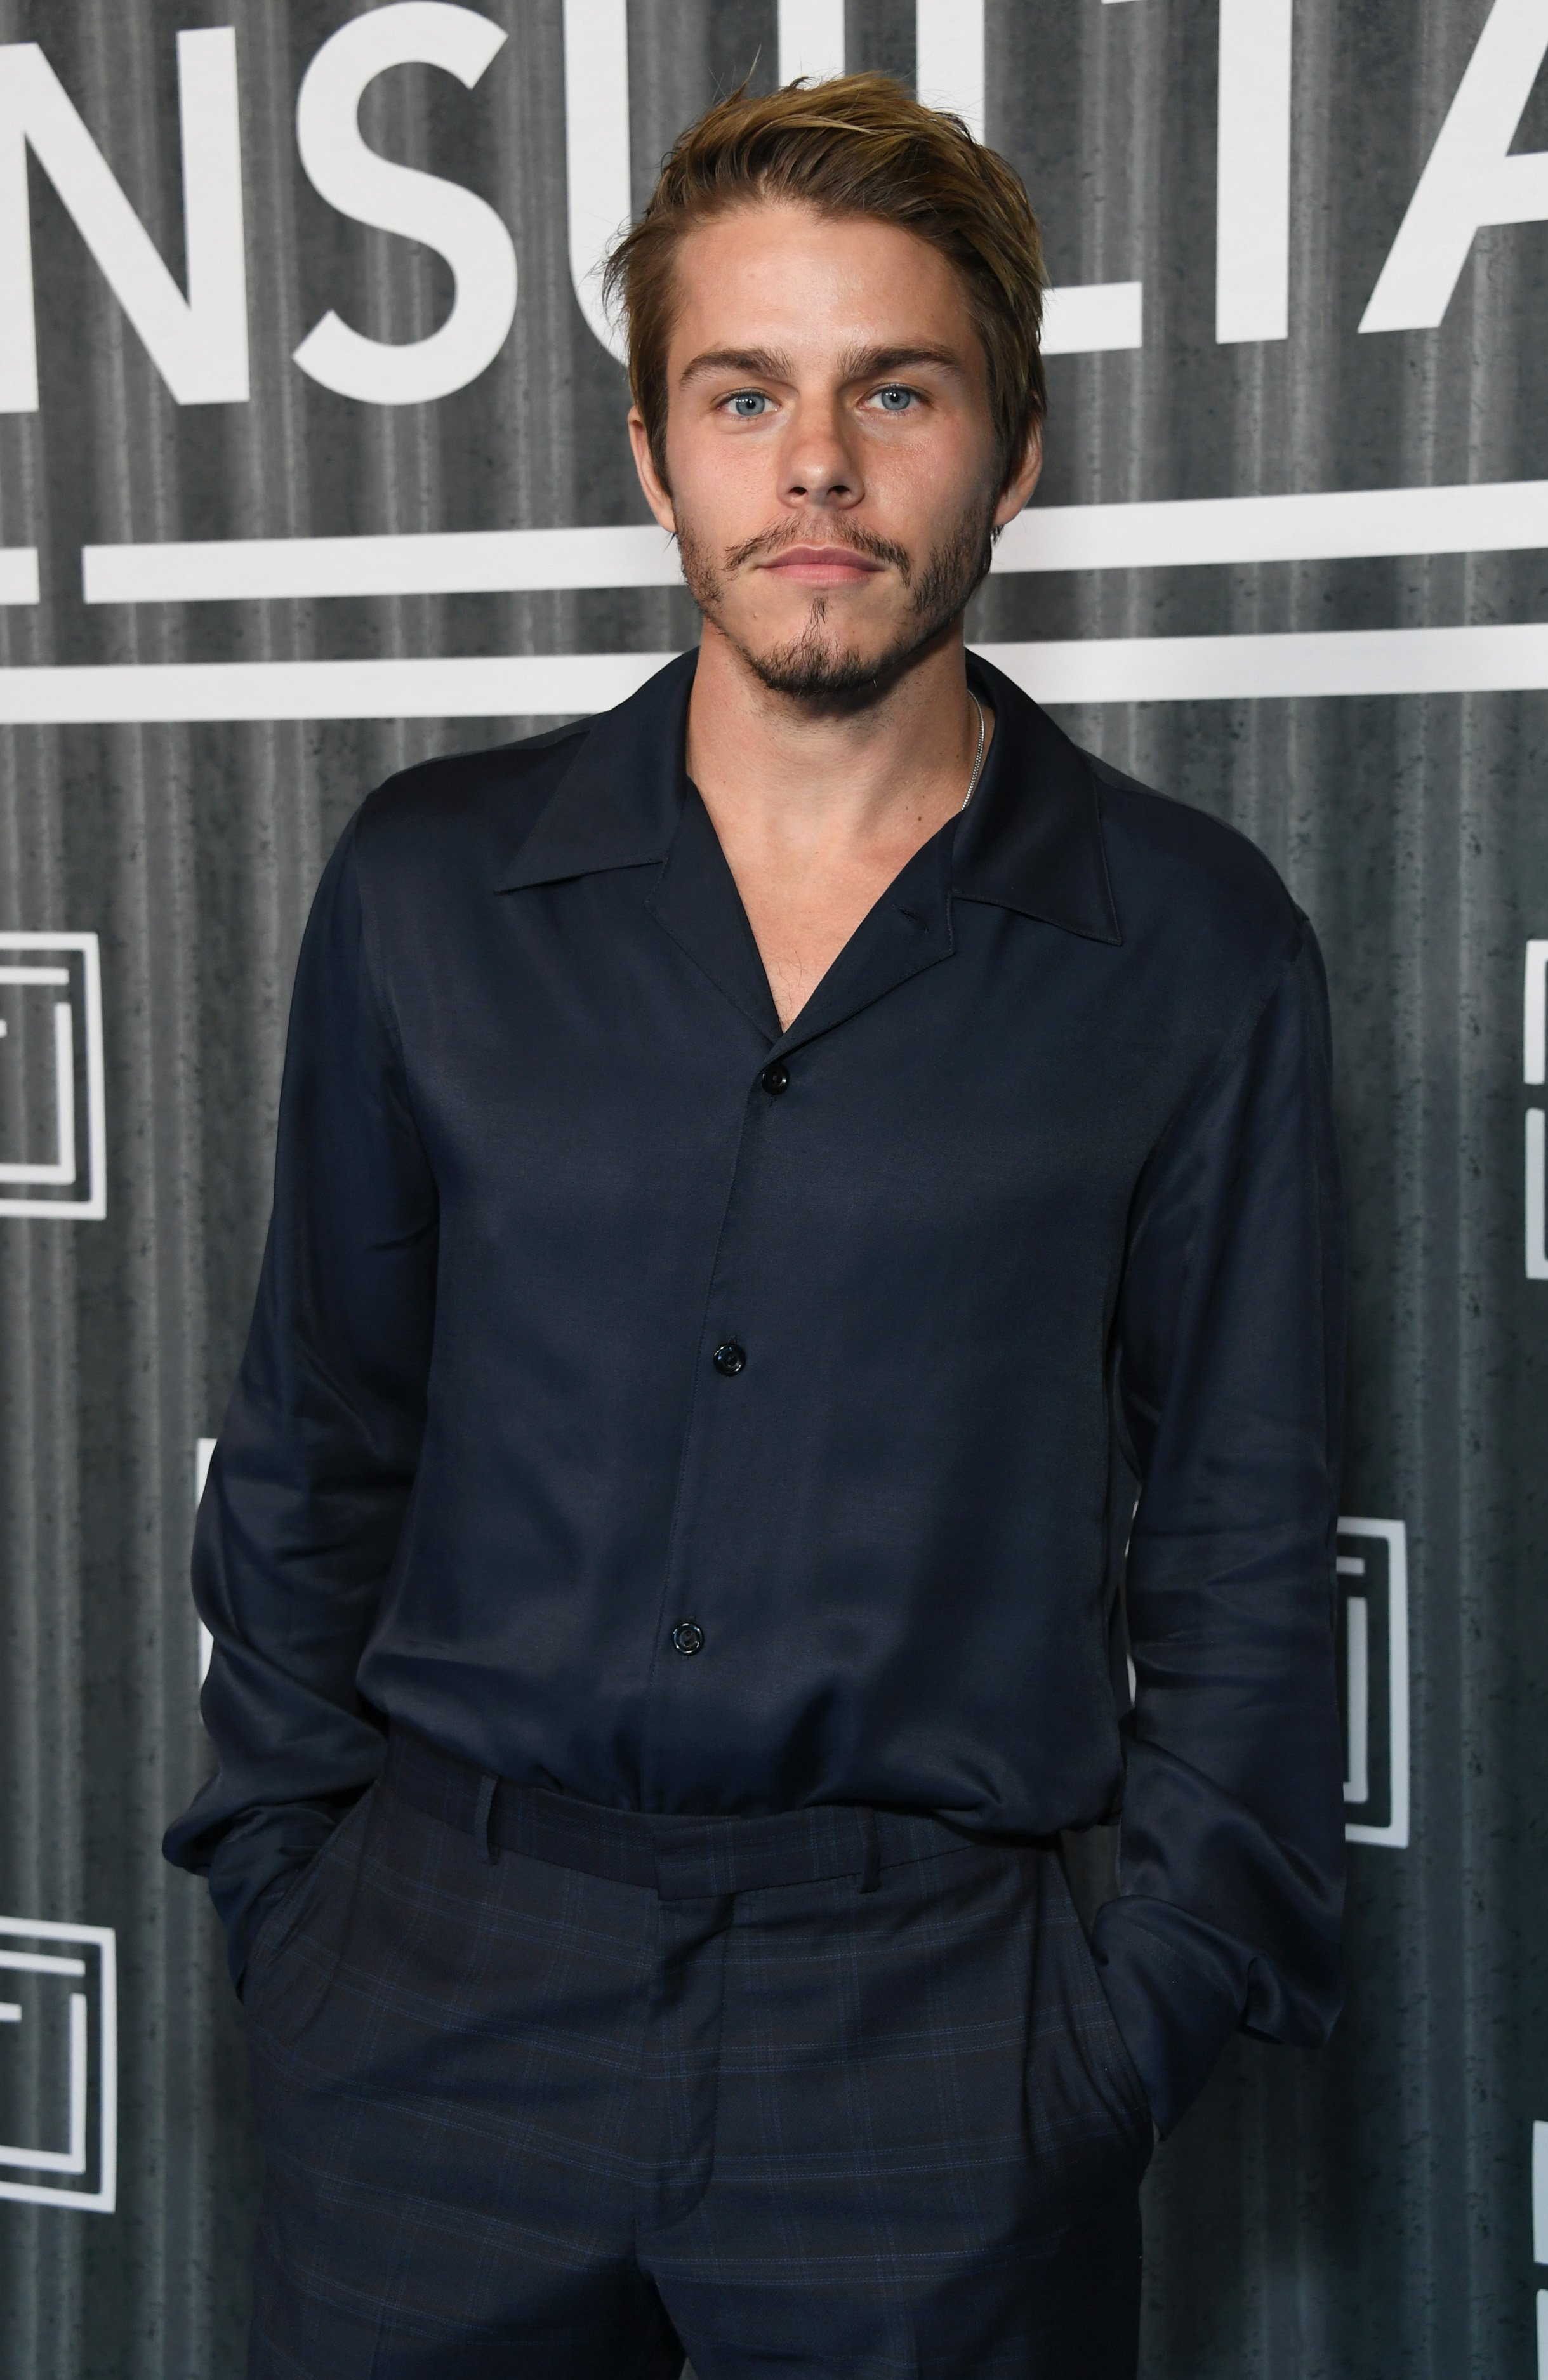 Jake Manley attends Prime Video's "The Consultant" Los Angeles premiere at Culver Theater, on February 13, 2023, in Culver City, California. | Source: Getty Images